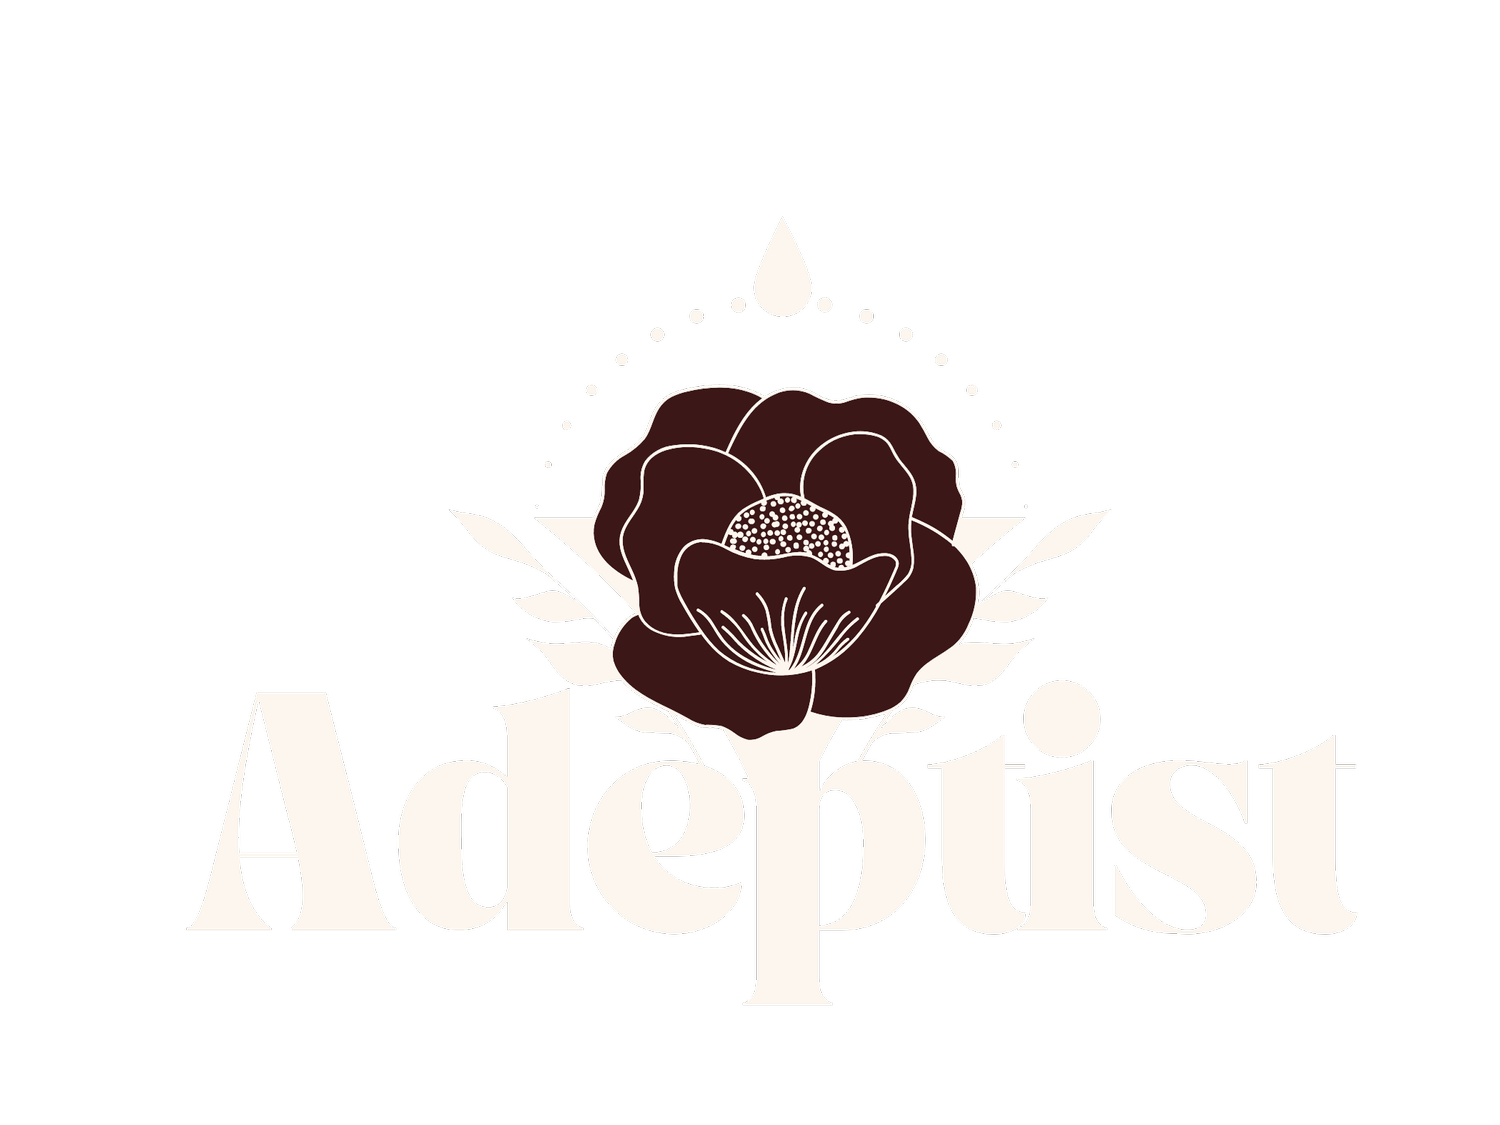 The Adeptist